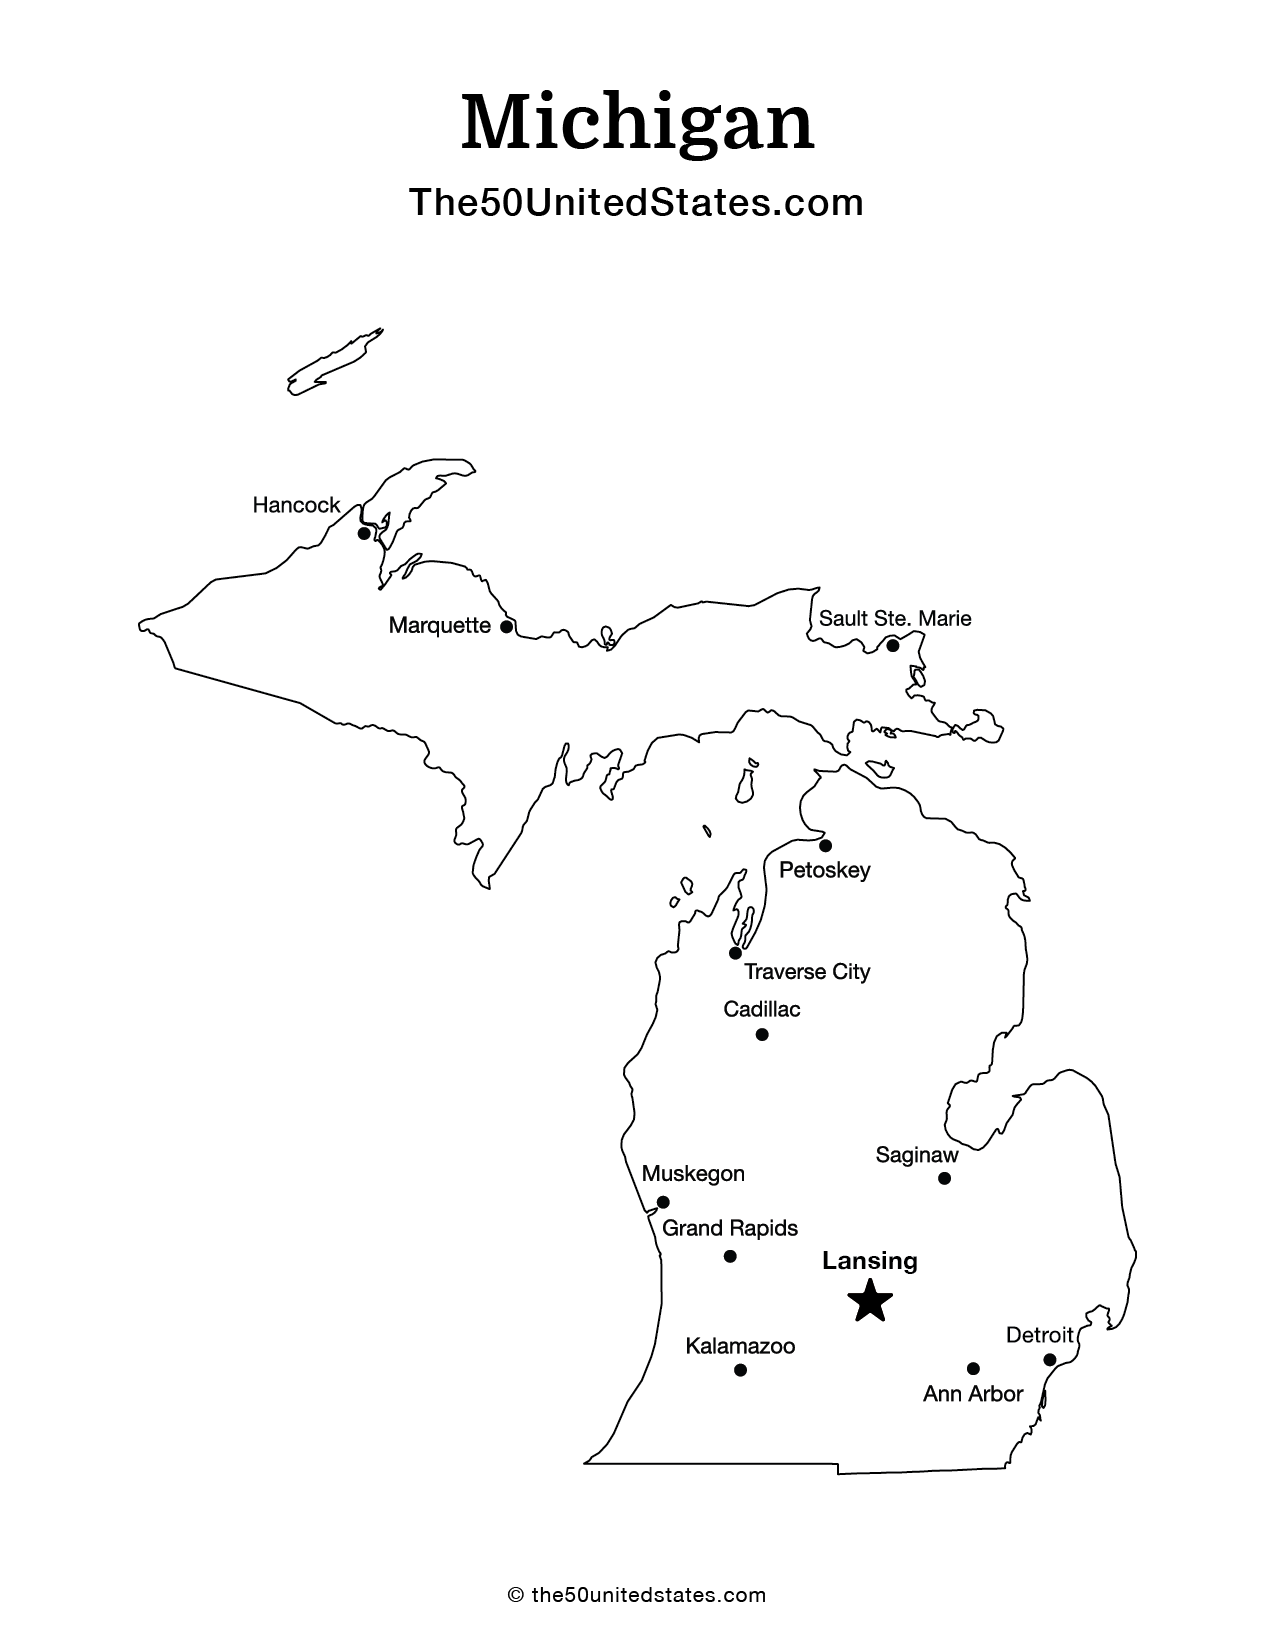 Map of Michigan with Cities (Labeled)